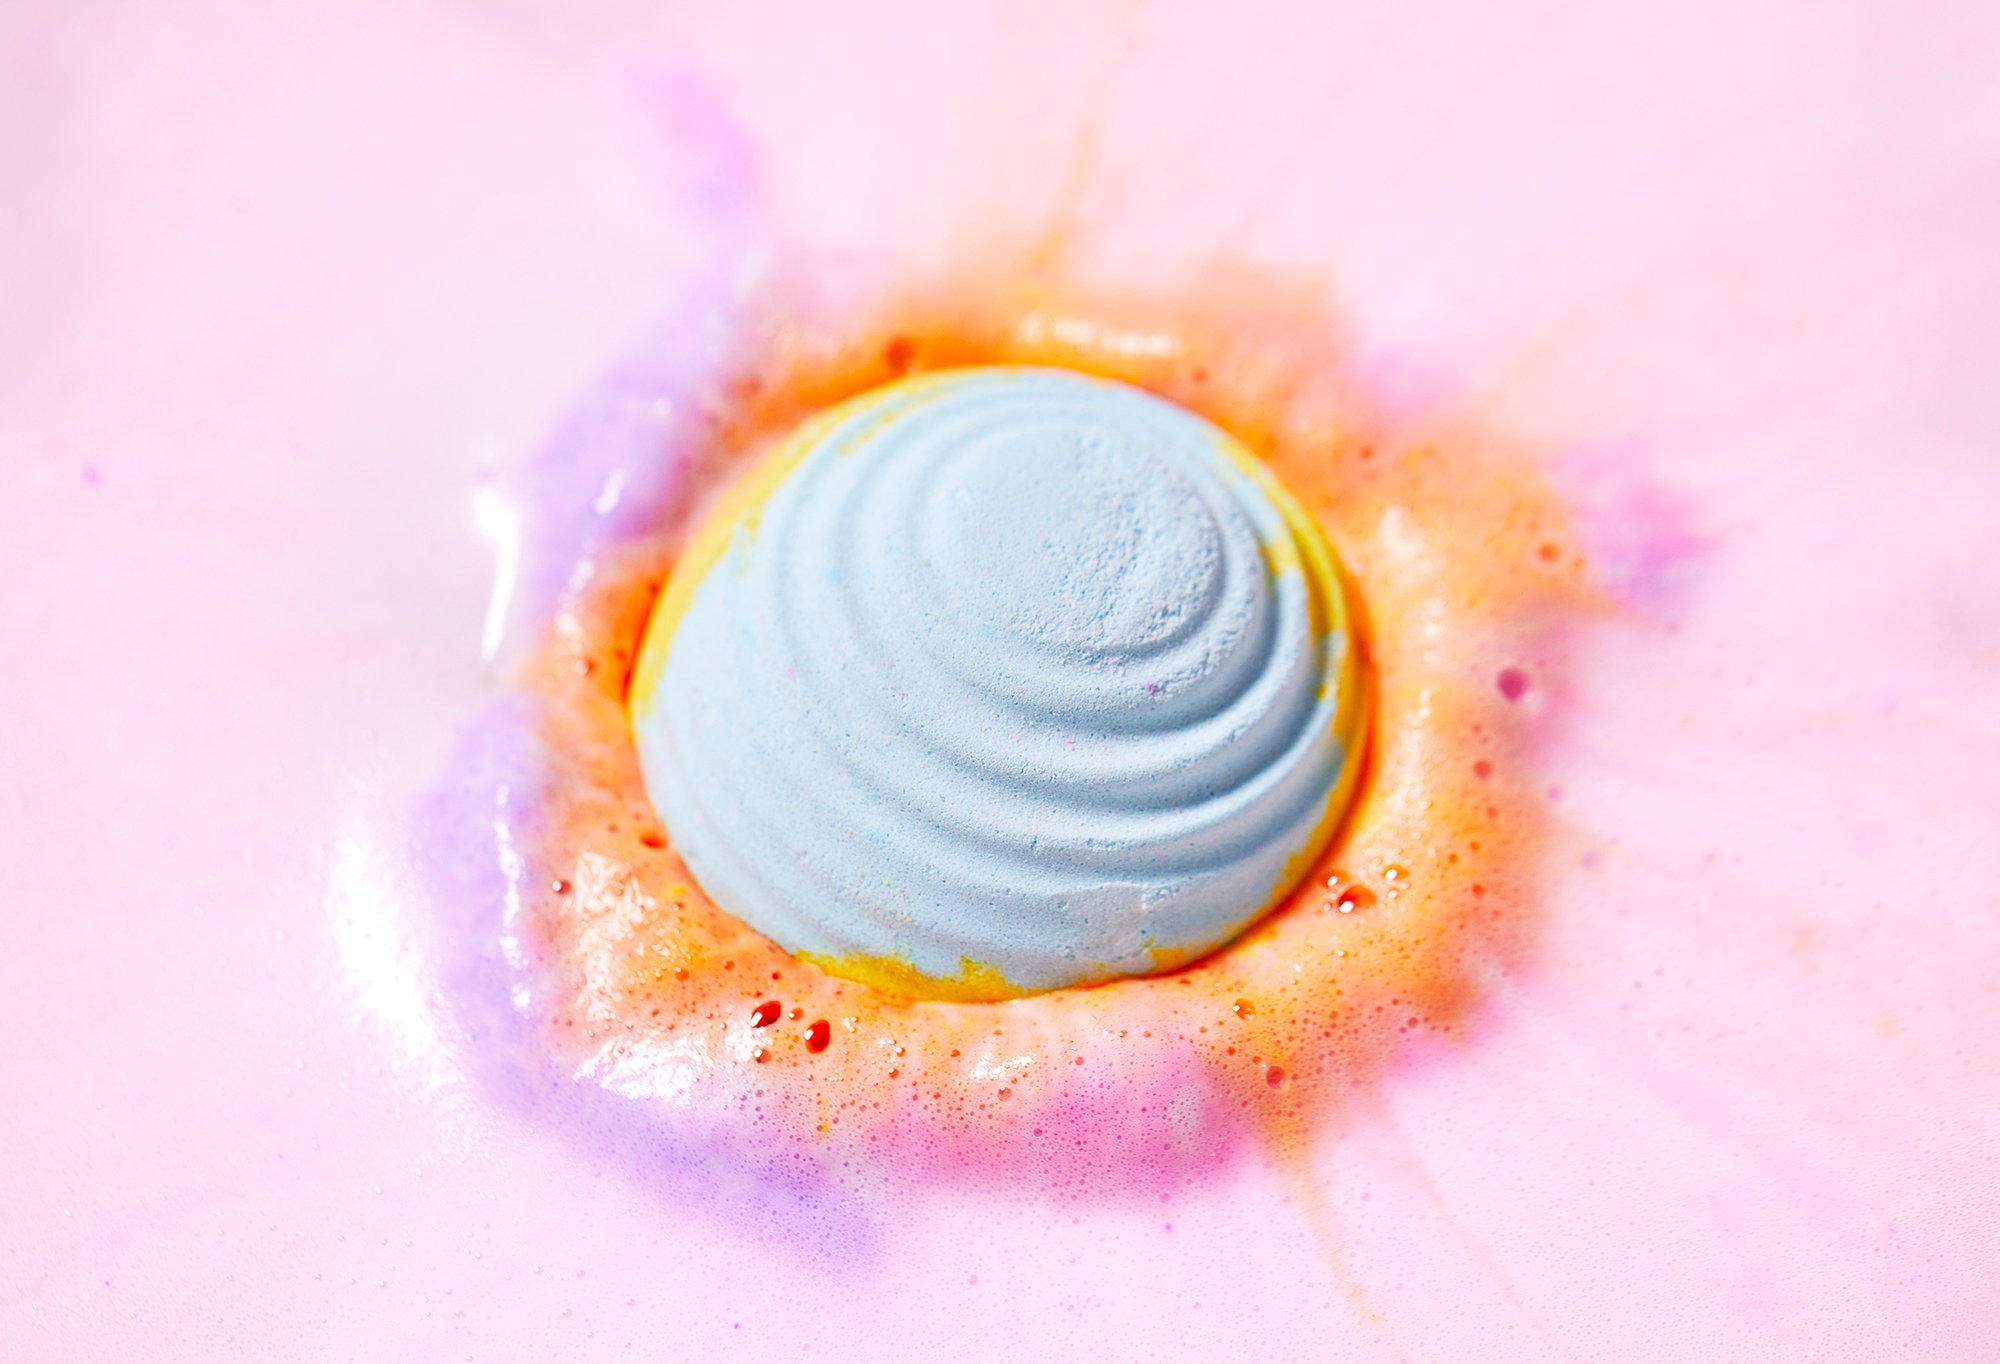 Groovy Bath bomb sits in the water surrounded by vibrant pinks, purples, oranges and blues for a funky fresh bath.